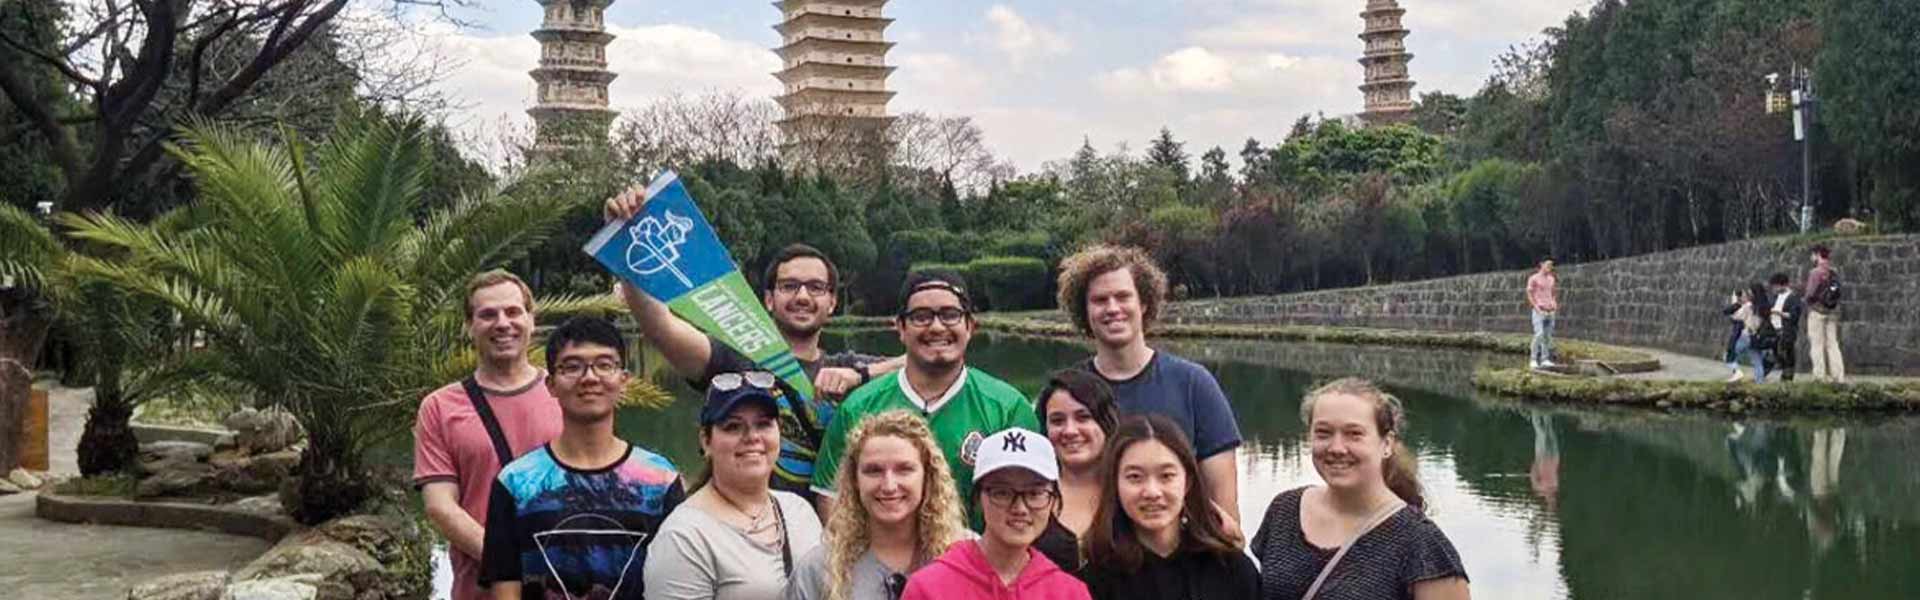 A Study-Abroad group pose for a picture on a school trip in China